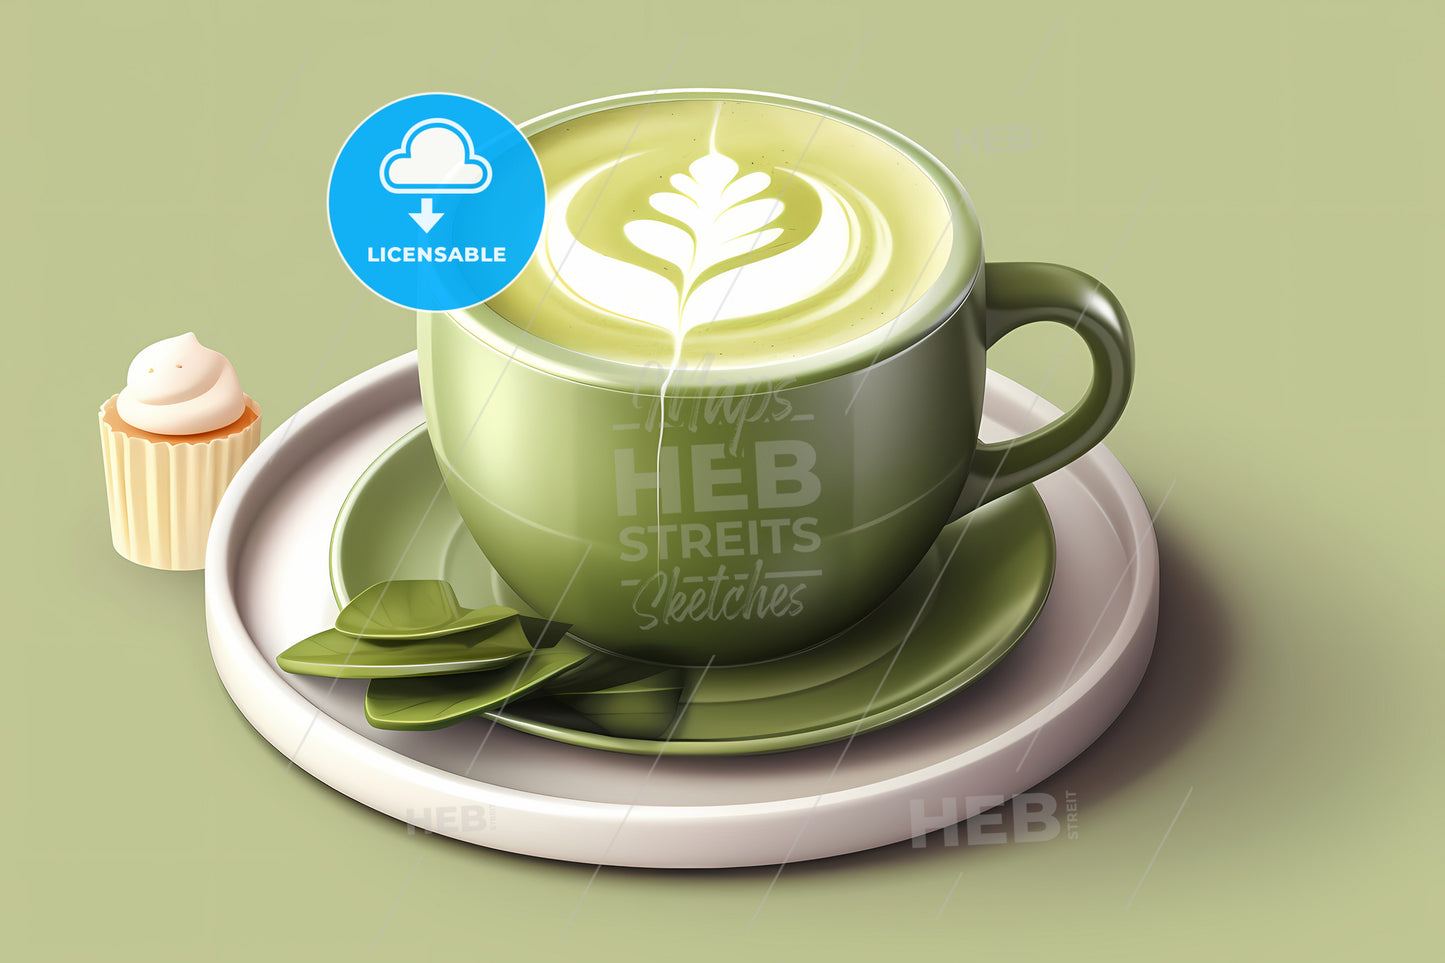 Japanese Matcha Latte In 3D Illustration, A Green Cup With A White Design On Top Of It